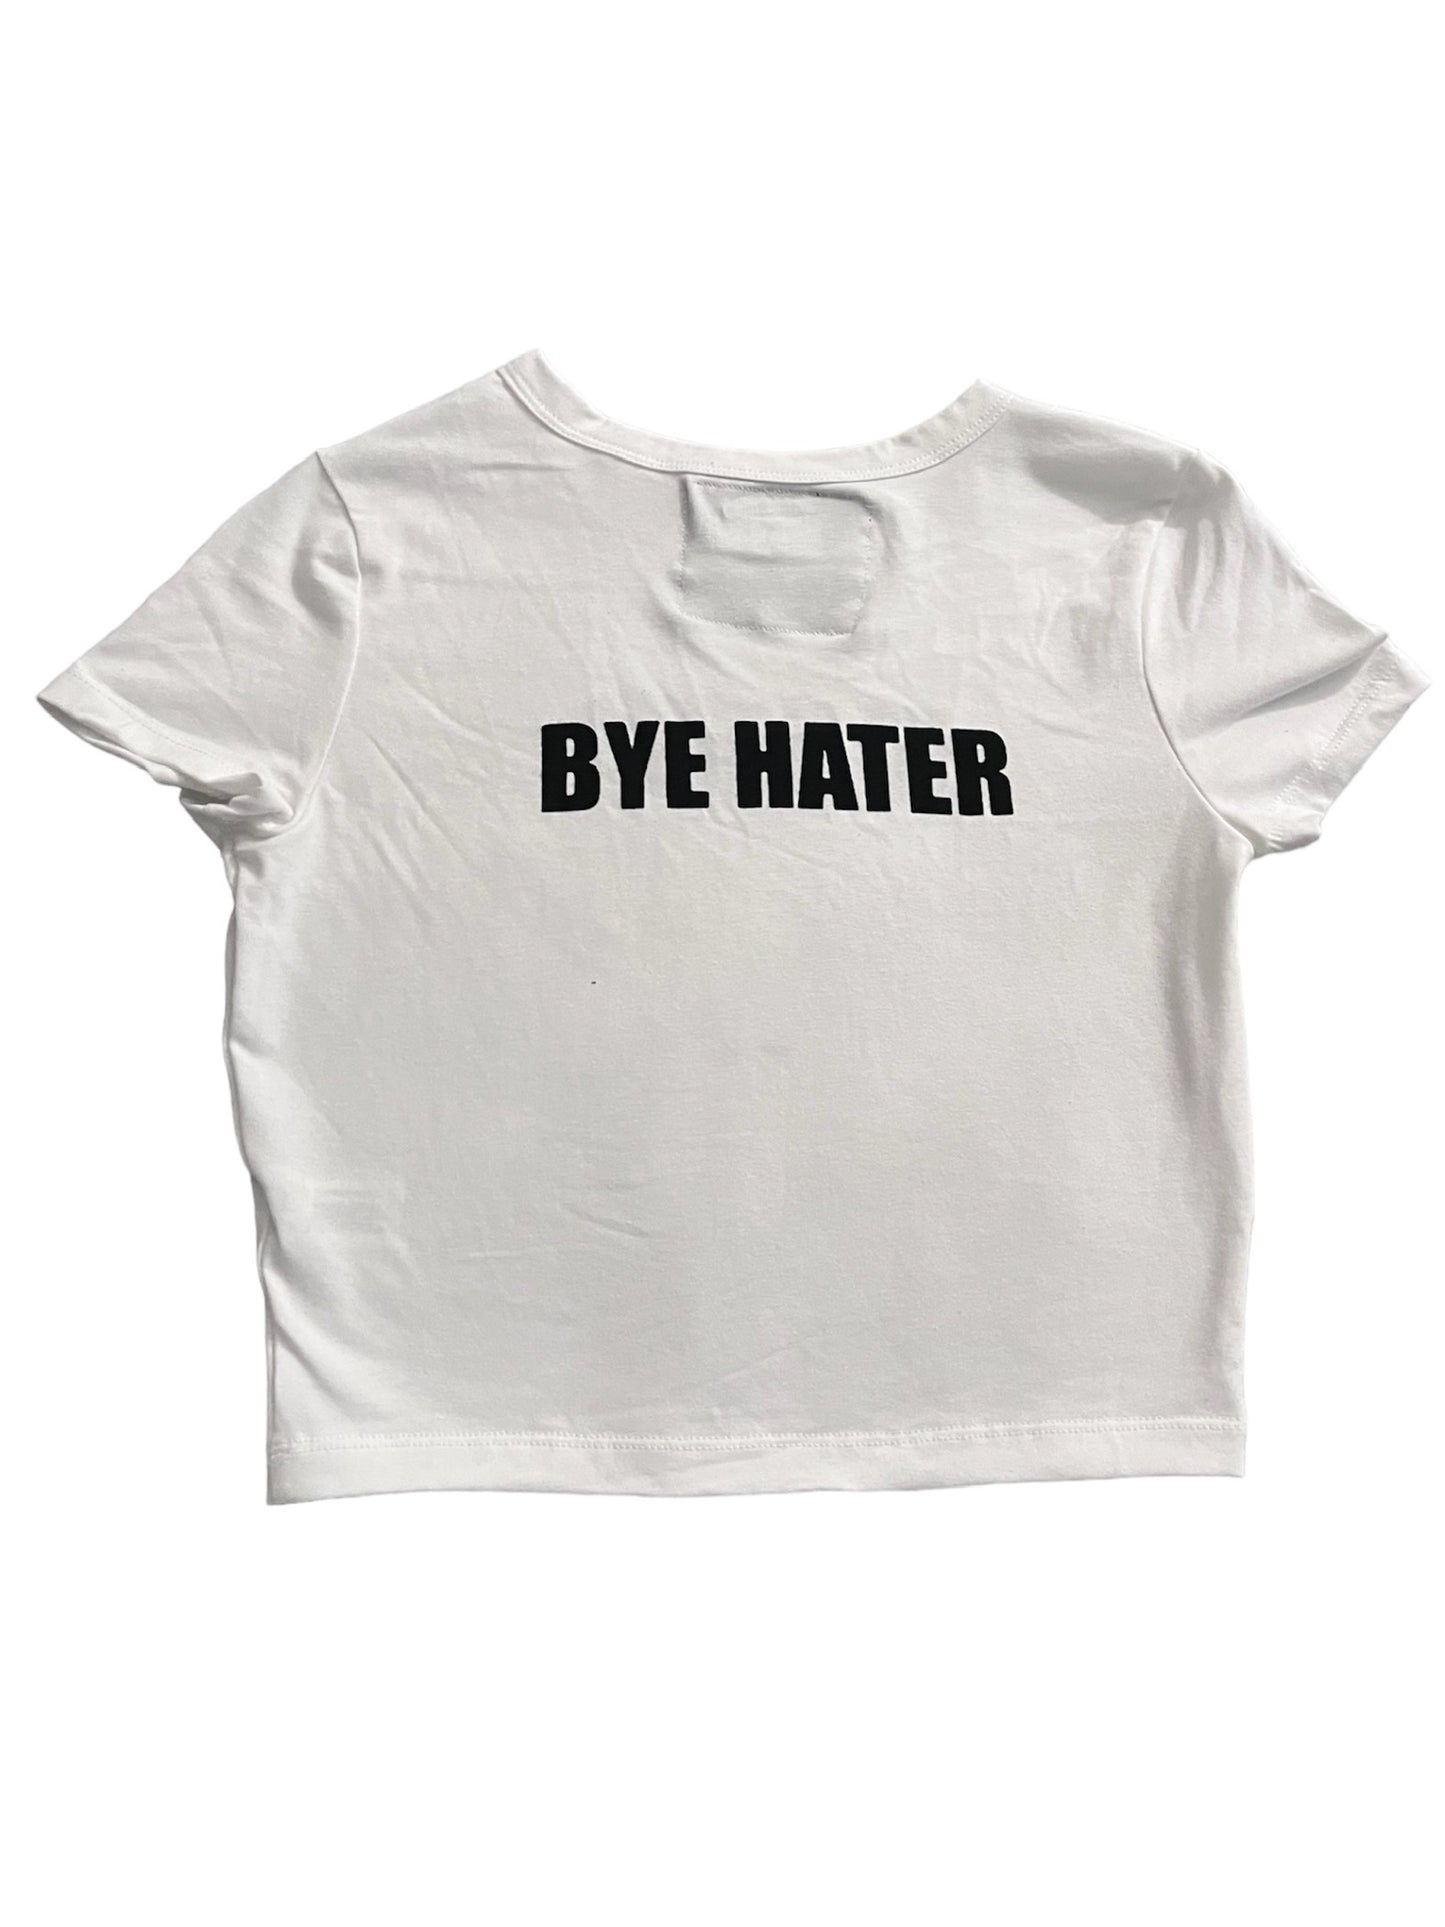 Hi hater!  cropped baby tee